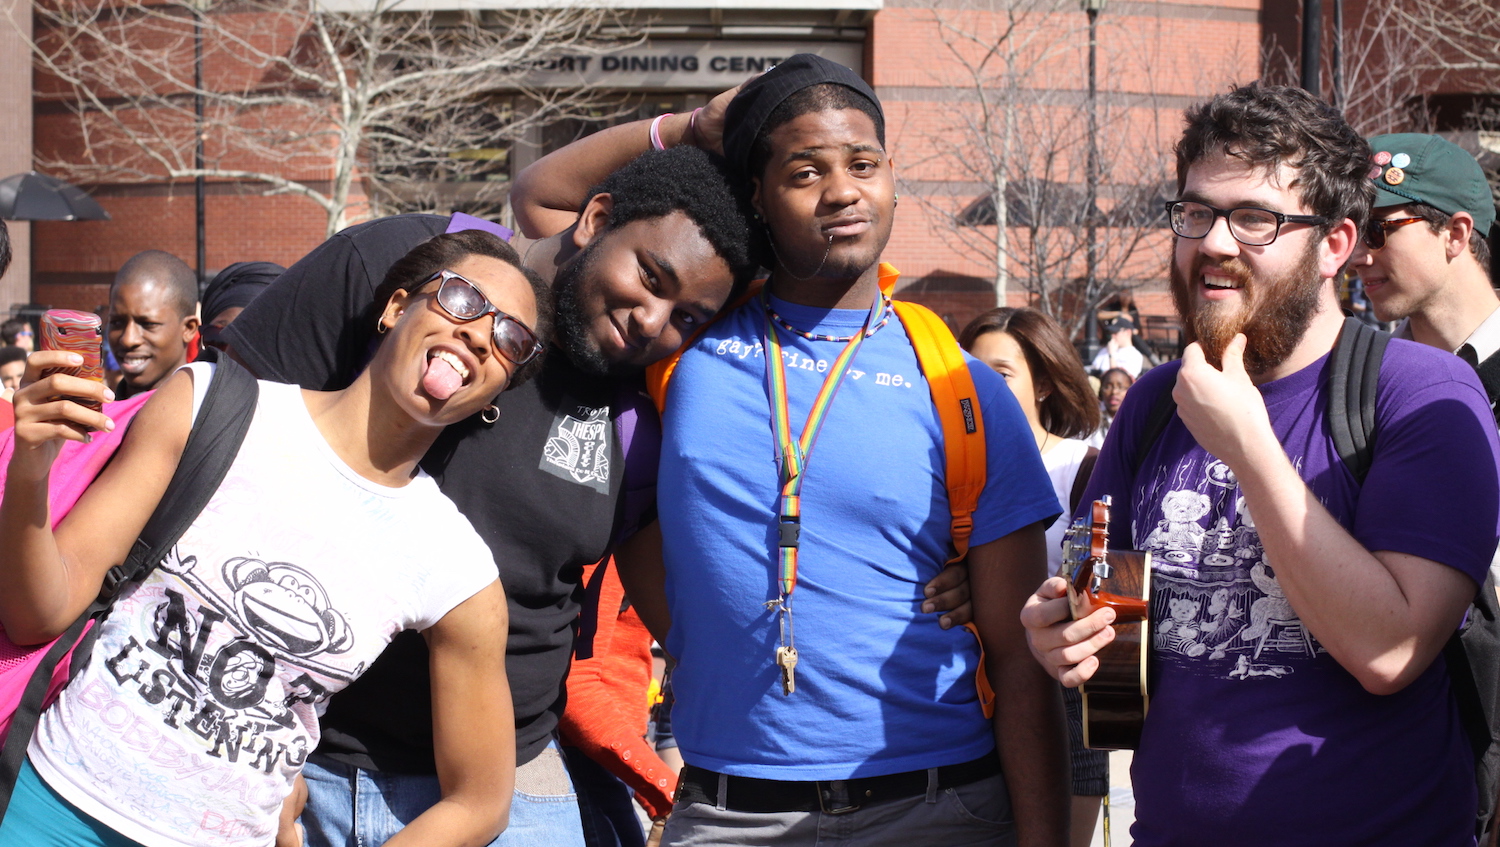 An ethnically diverse group of young male and female college students clowning for the camera